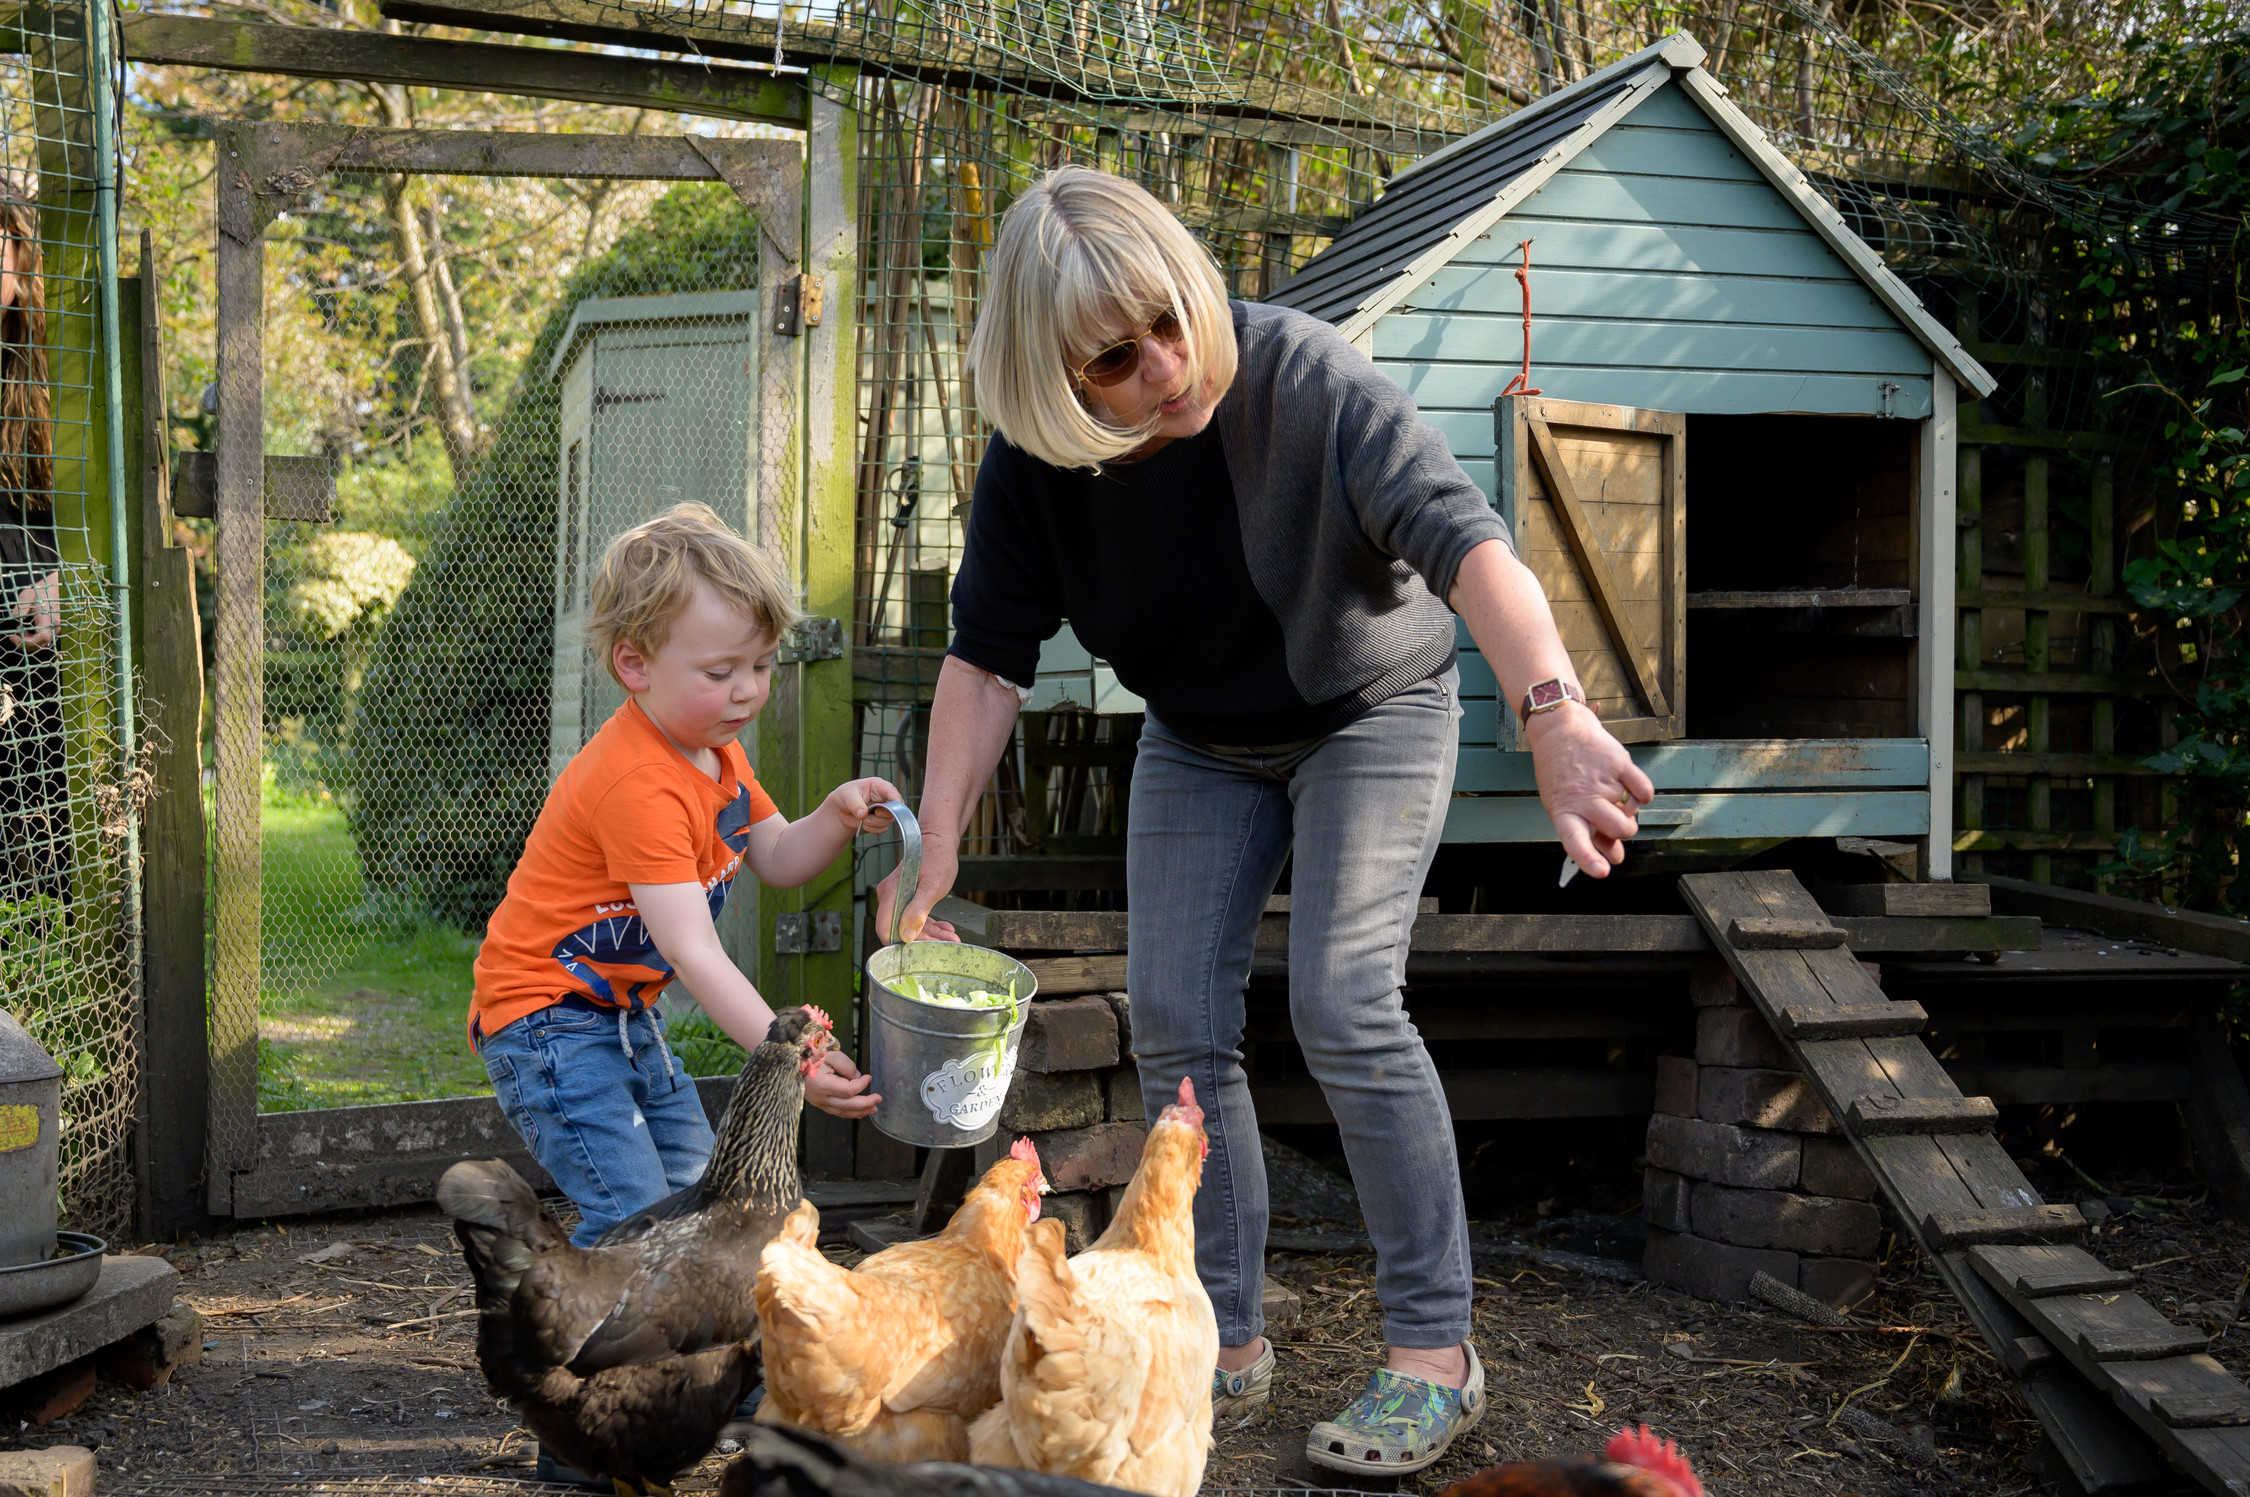 Photo of grandmother with grandchild together in the garden feeding chickens